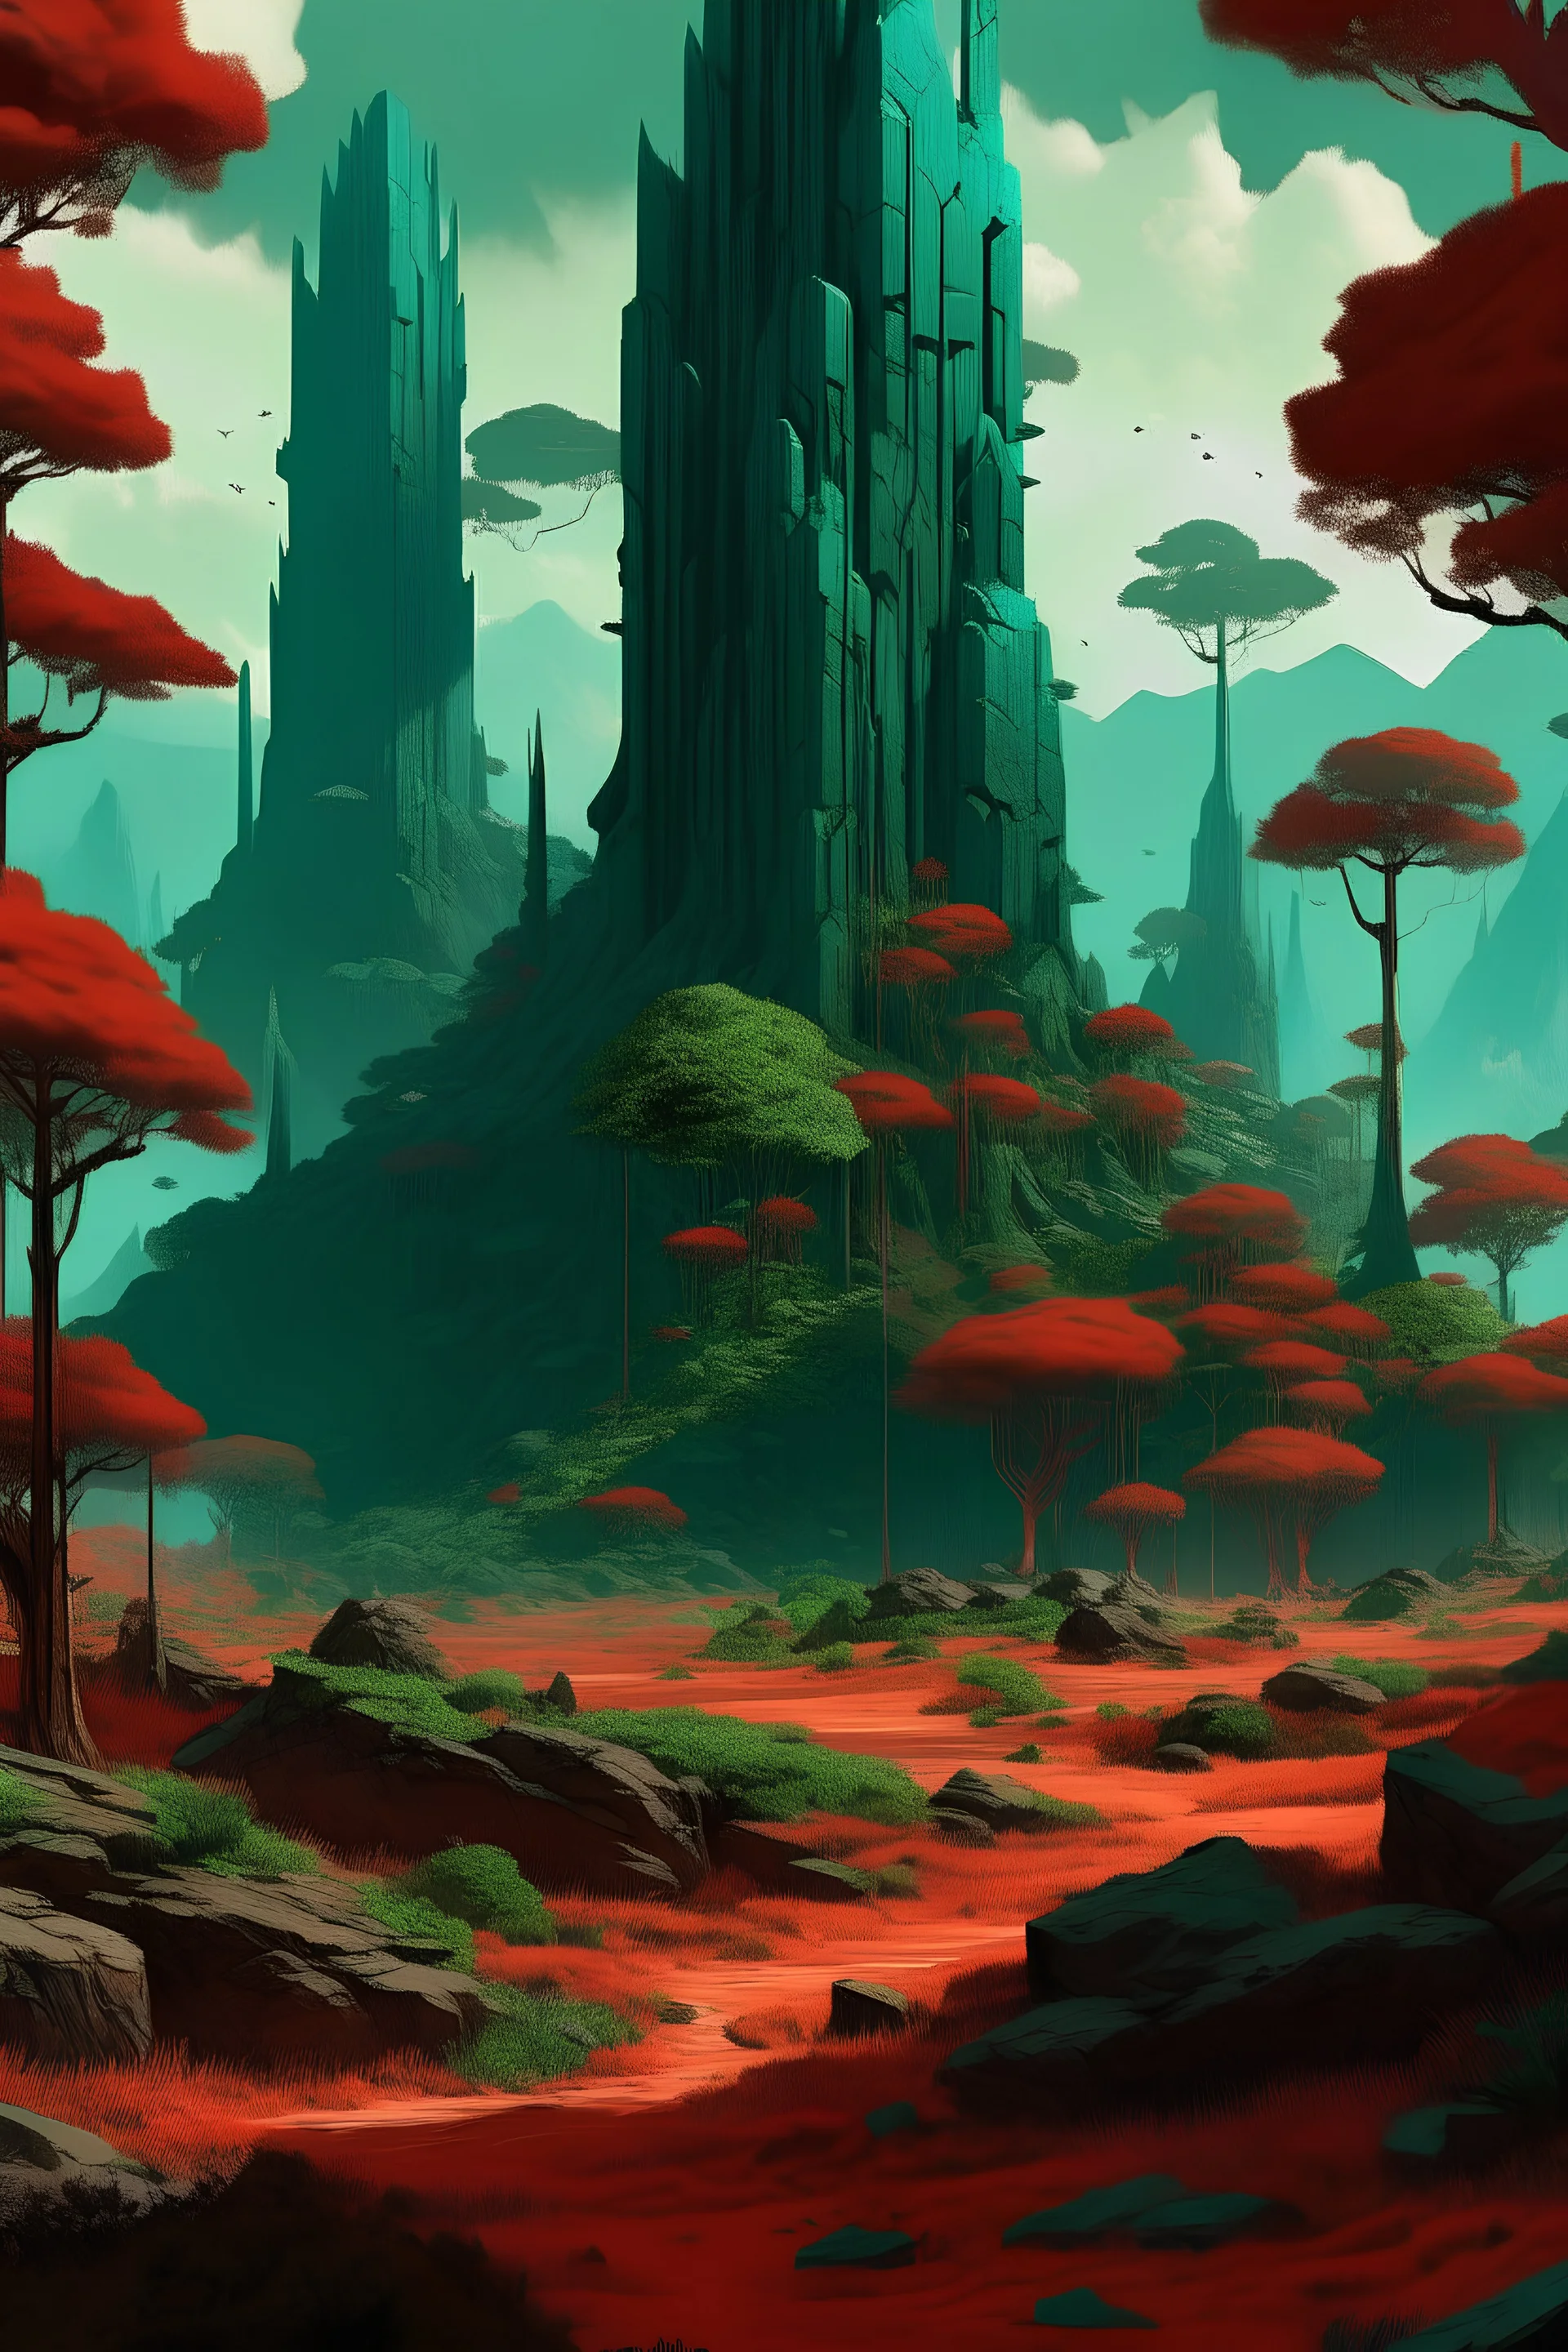 Fantasy landscape of a teeming emerald jungle with trees that have red bark, and rich red soil beneath. In the middle of a clearing is an ancient obsidian tower, not too tall but decidedly sleek and imposing.